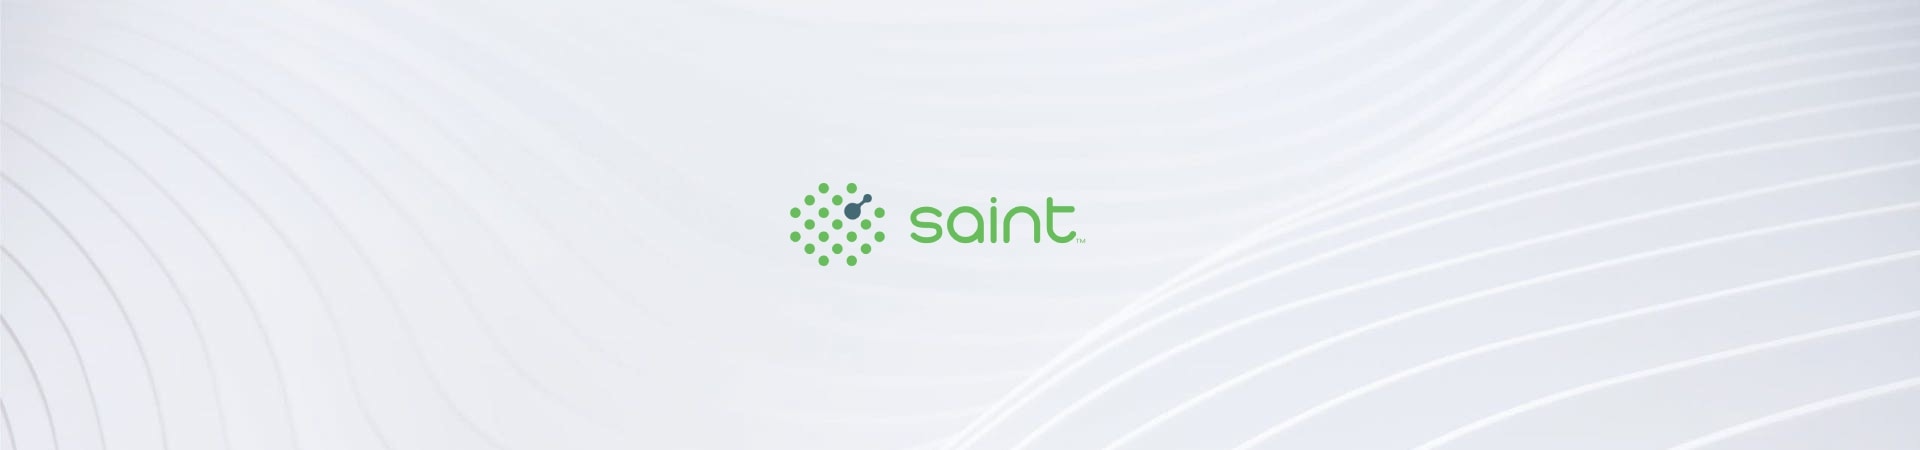 Background with SAINT logo and wavy lines